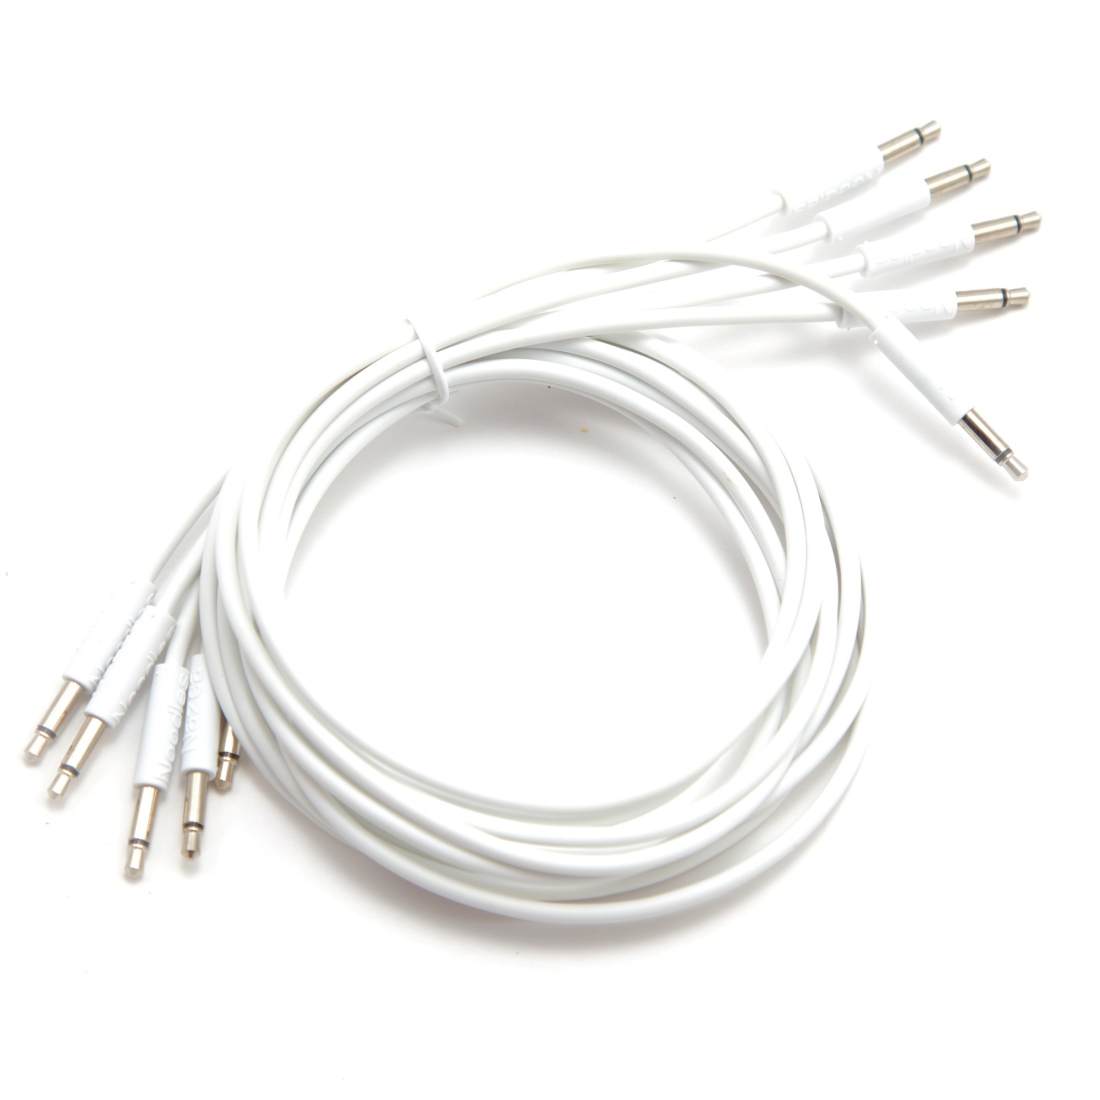 Patch Cables 3.5mm TS to 3.5mm TS - 300cm - White (2-Pack)